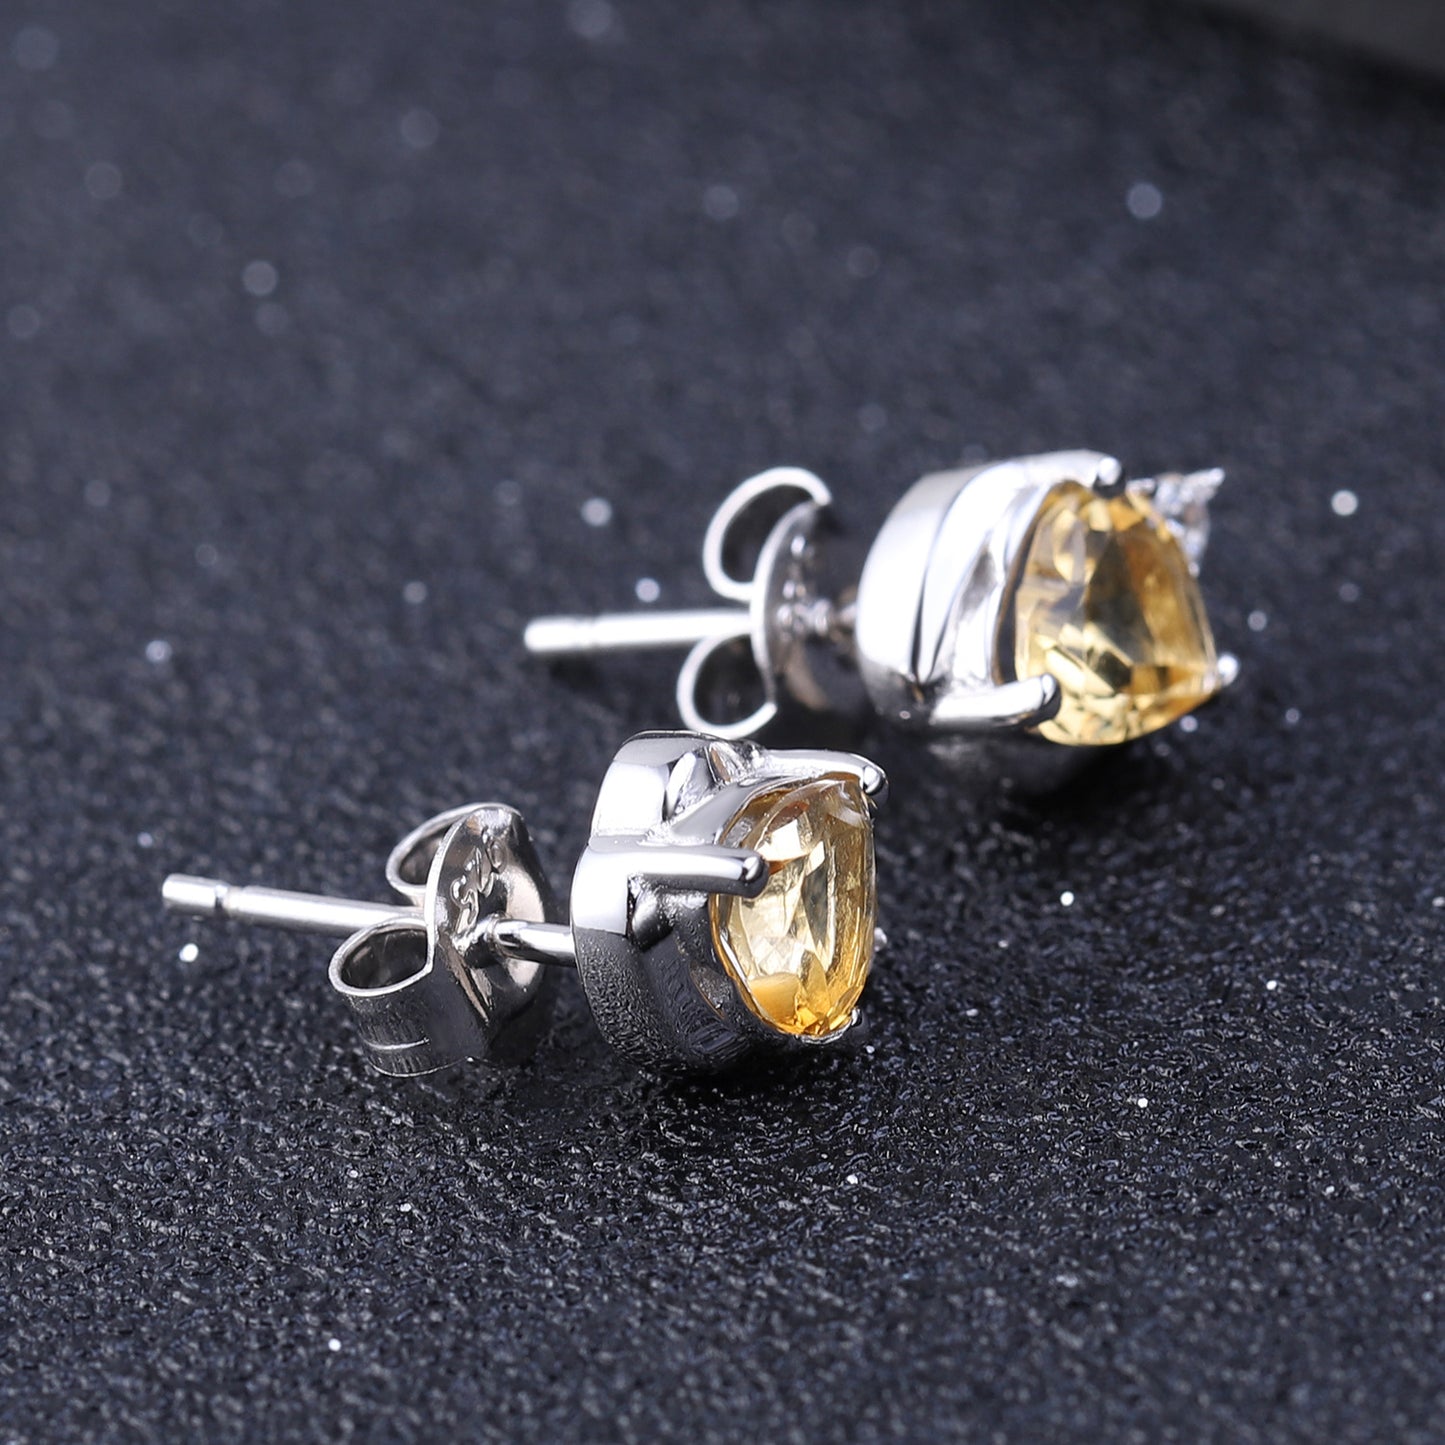 Natural Crystal Heart-shaped Silver Studs Earrings for Women